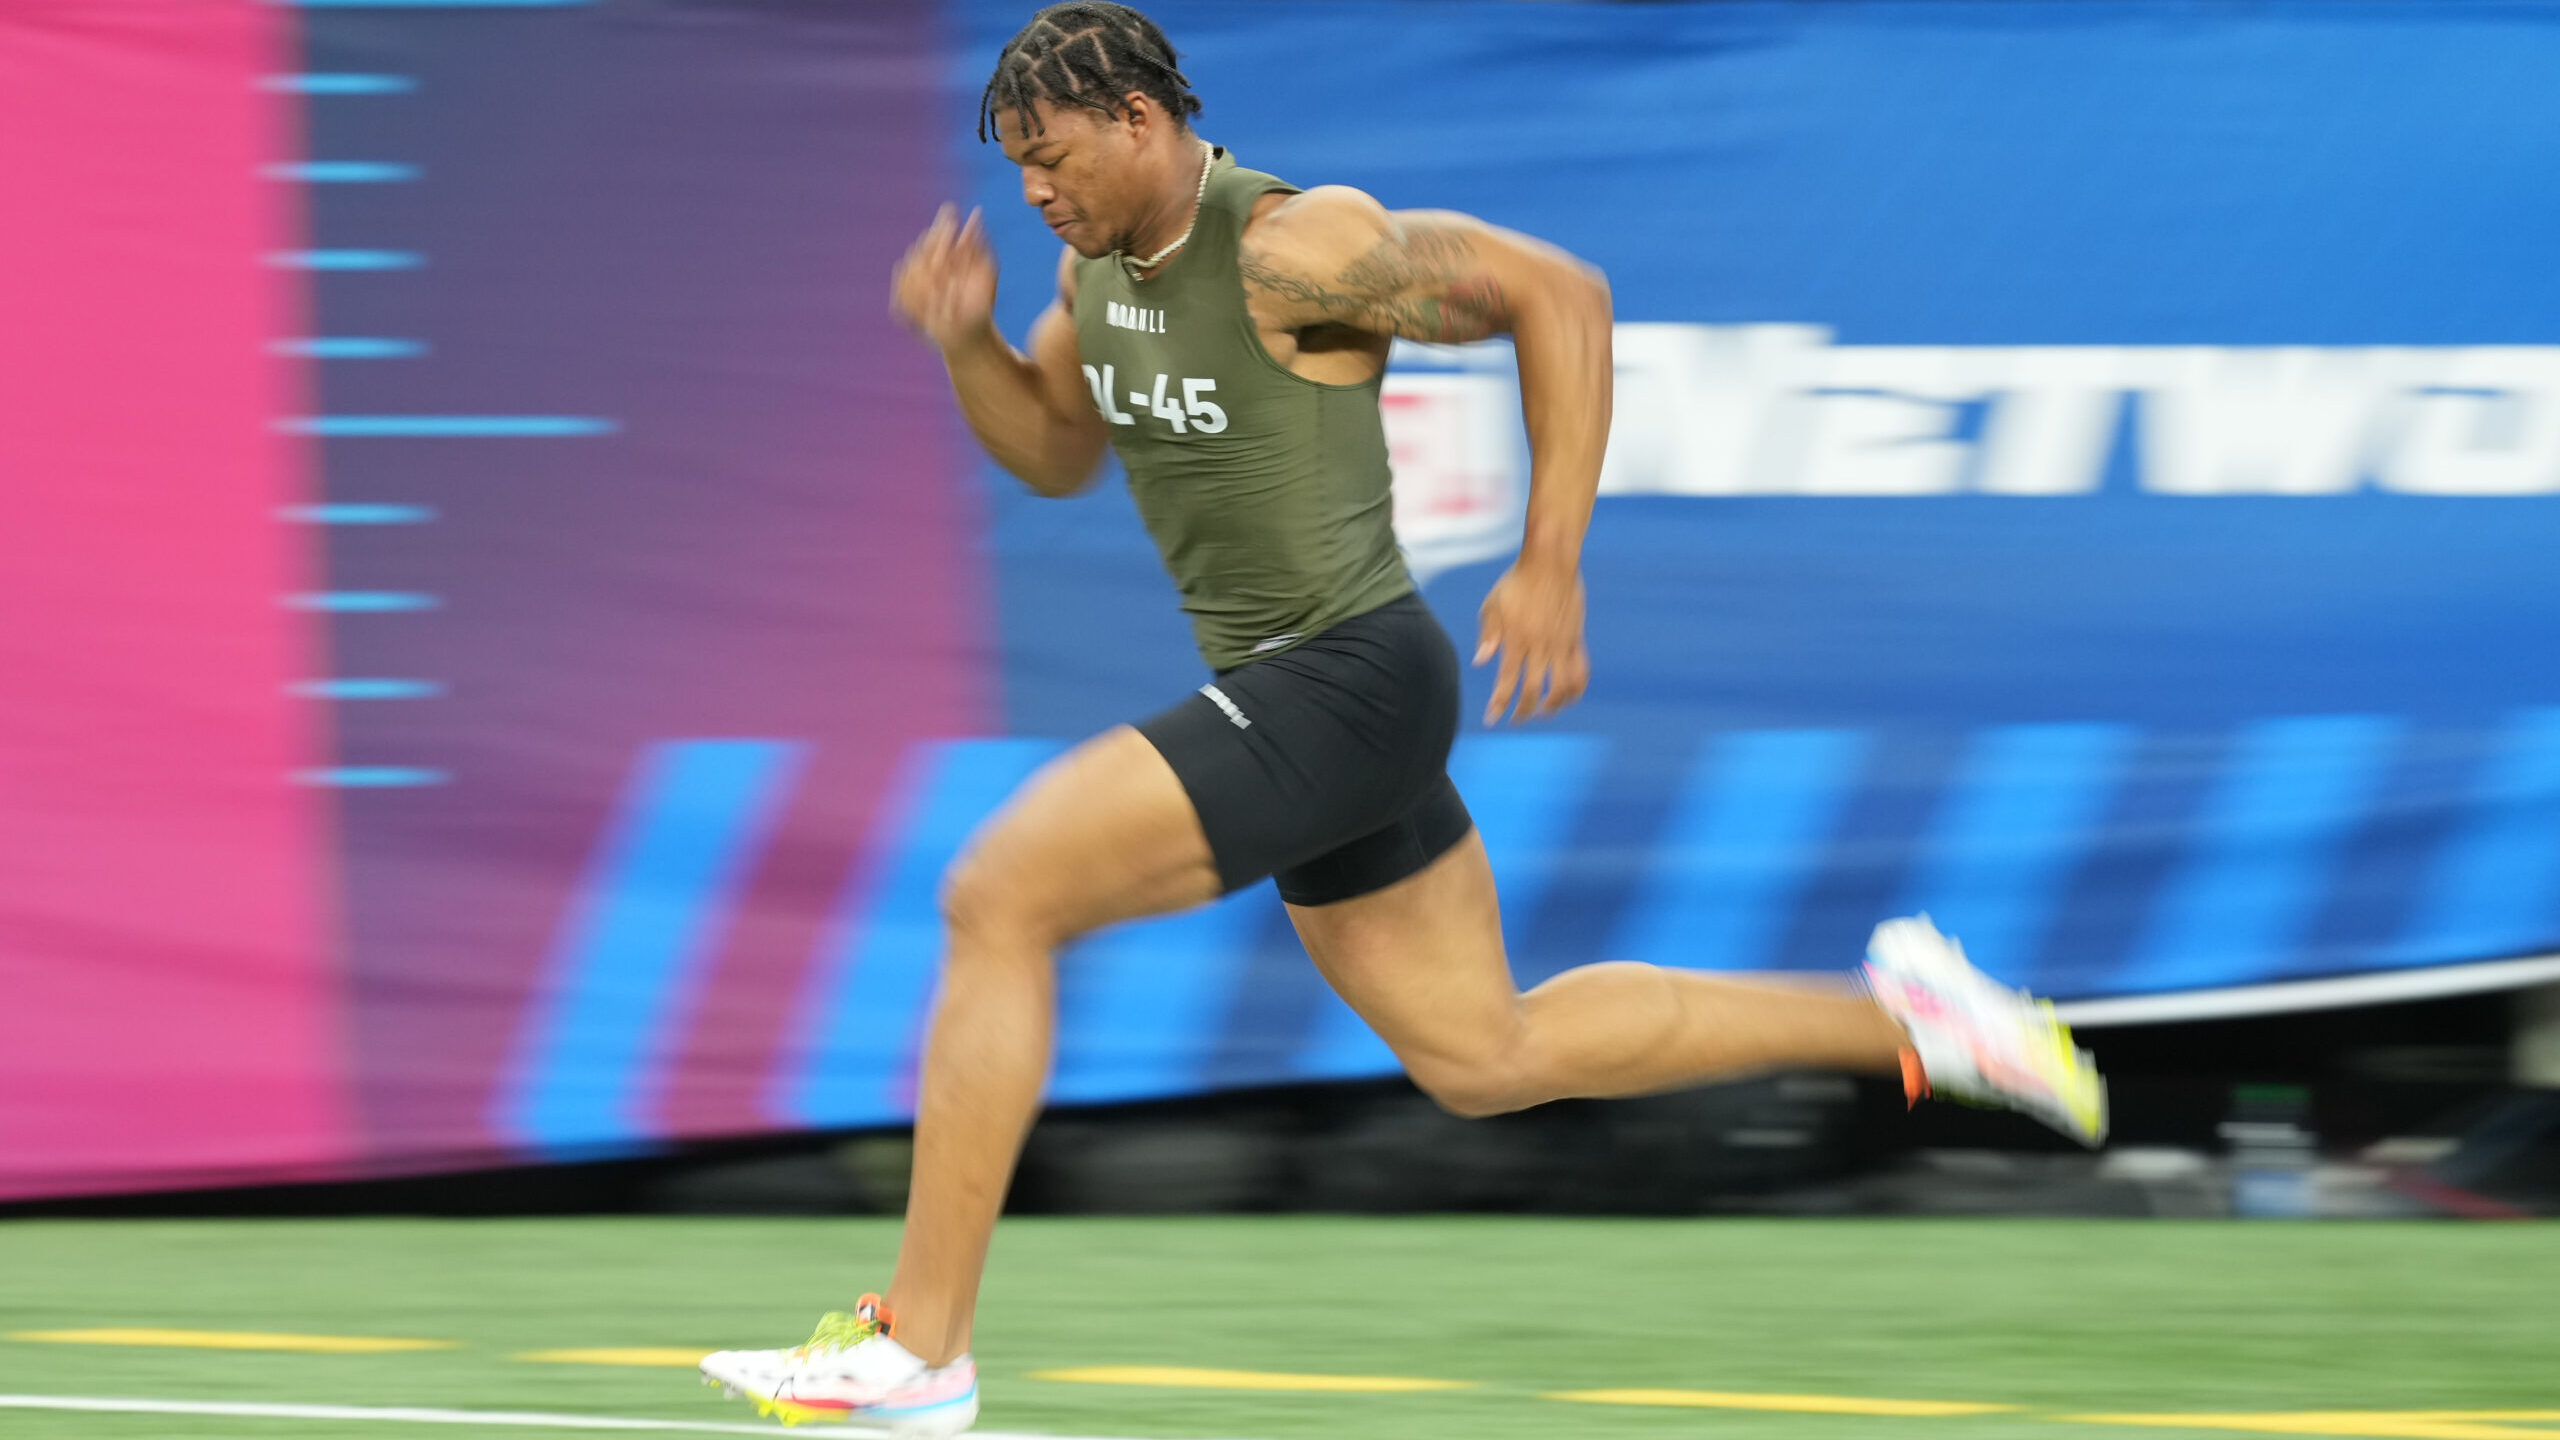 2023 NFL Combine: DL, LB Weigh-in Results